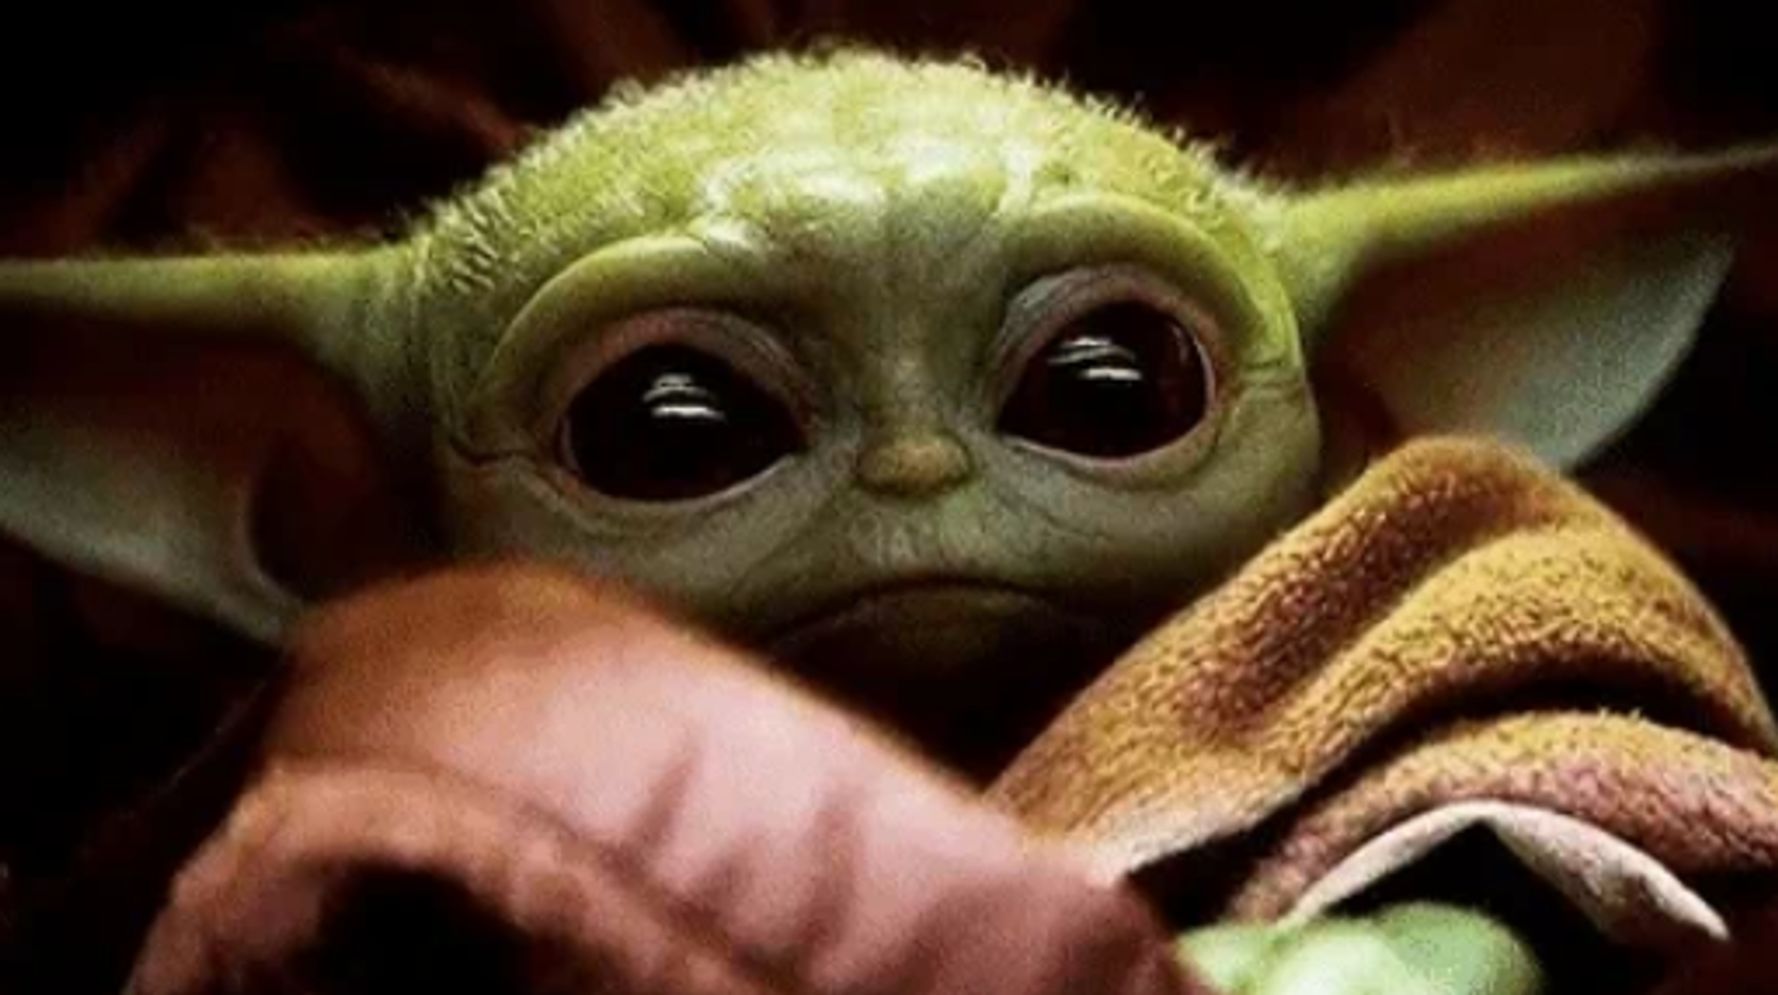 Hospital Dresses Newborns As Baby Yoda And Ridiculously Adorable They ...